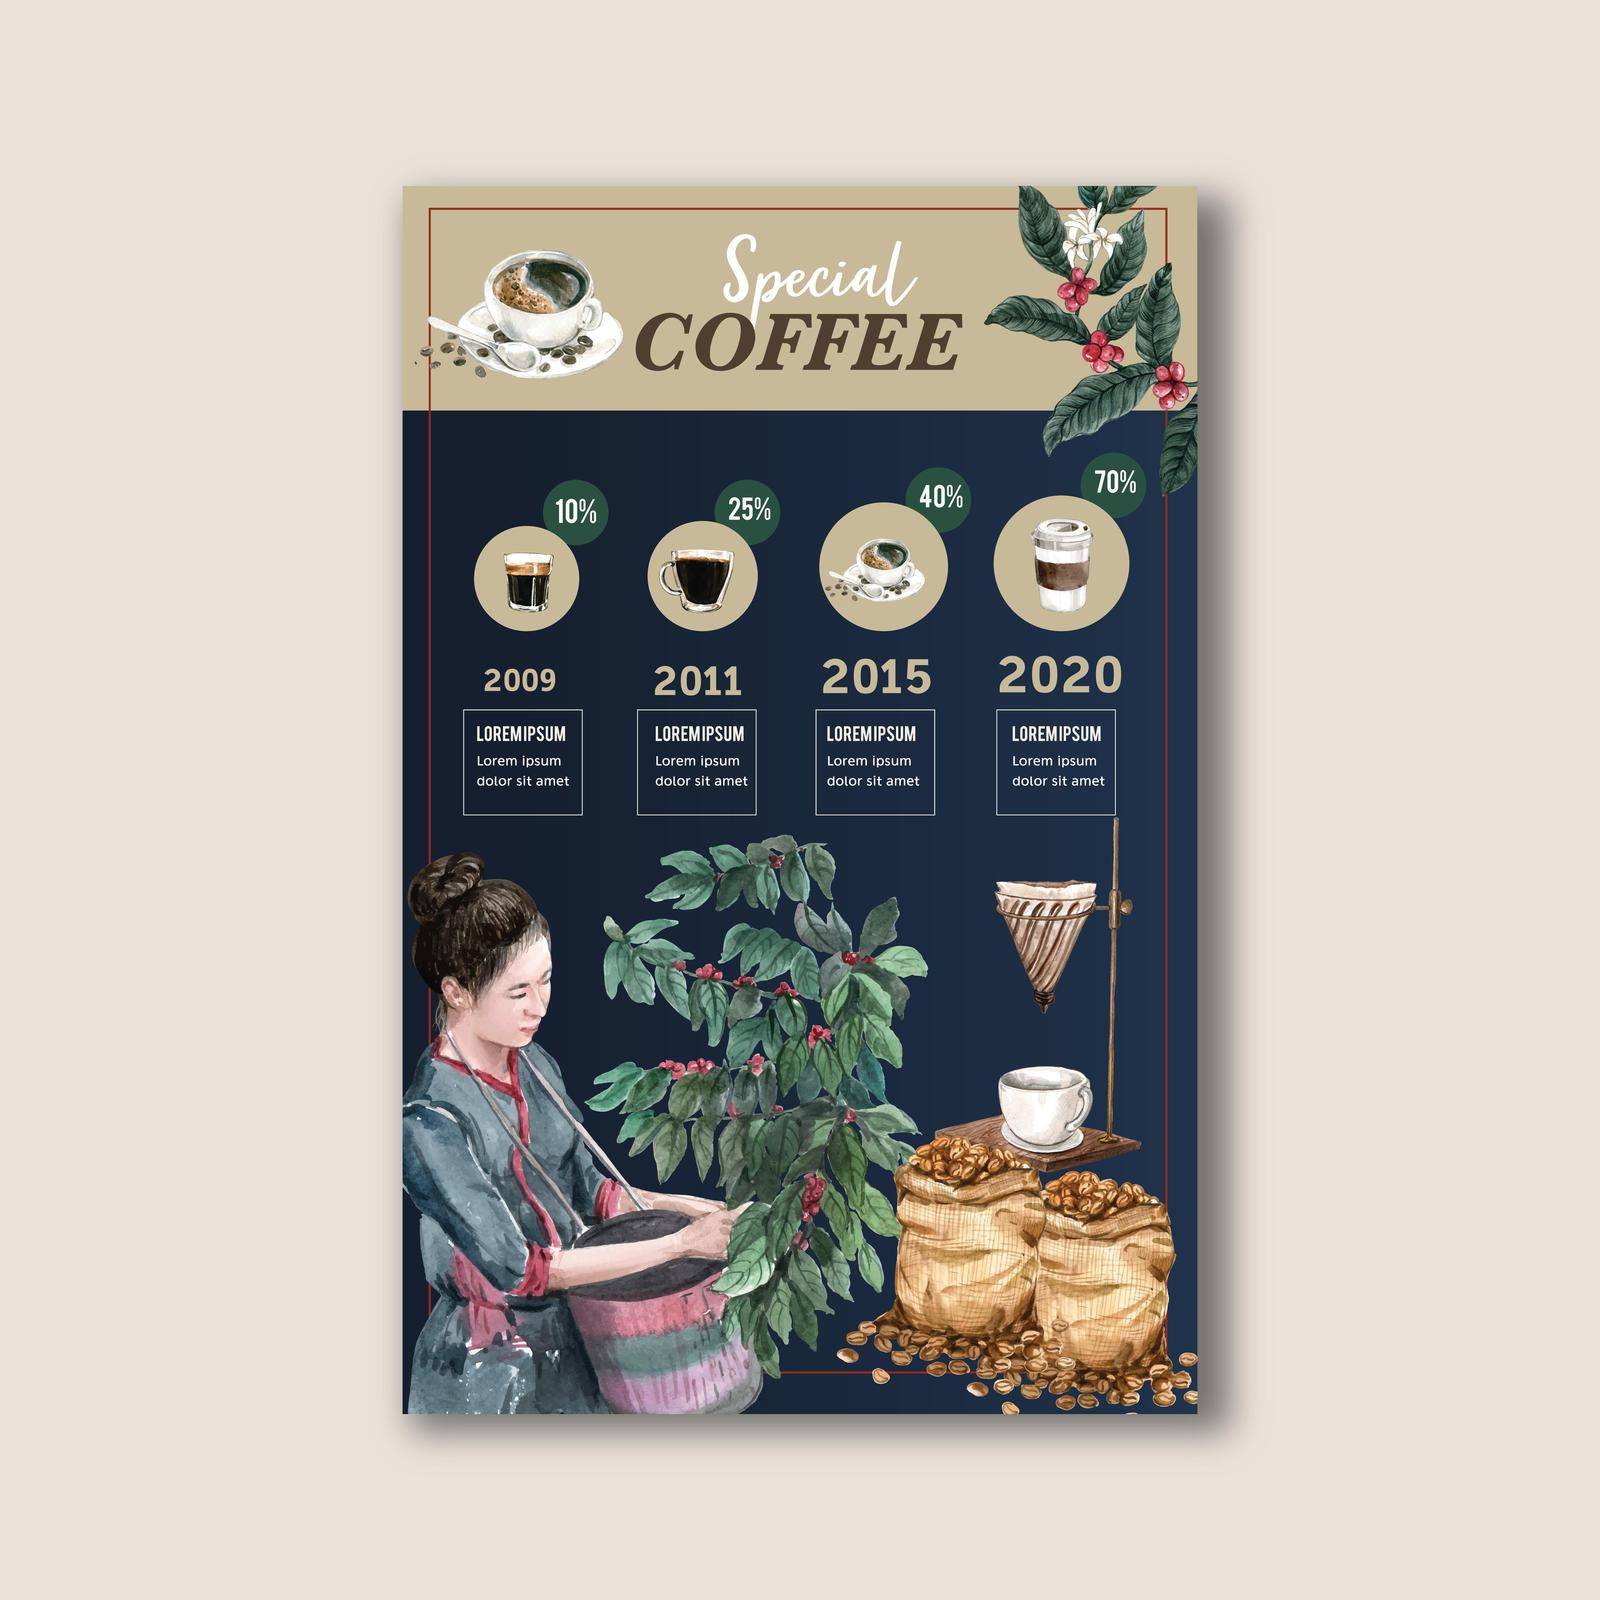 crafted by heart of coffee maker, americano, cappuccino menu, infographic watercolor illustration by Photographeeasia